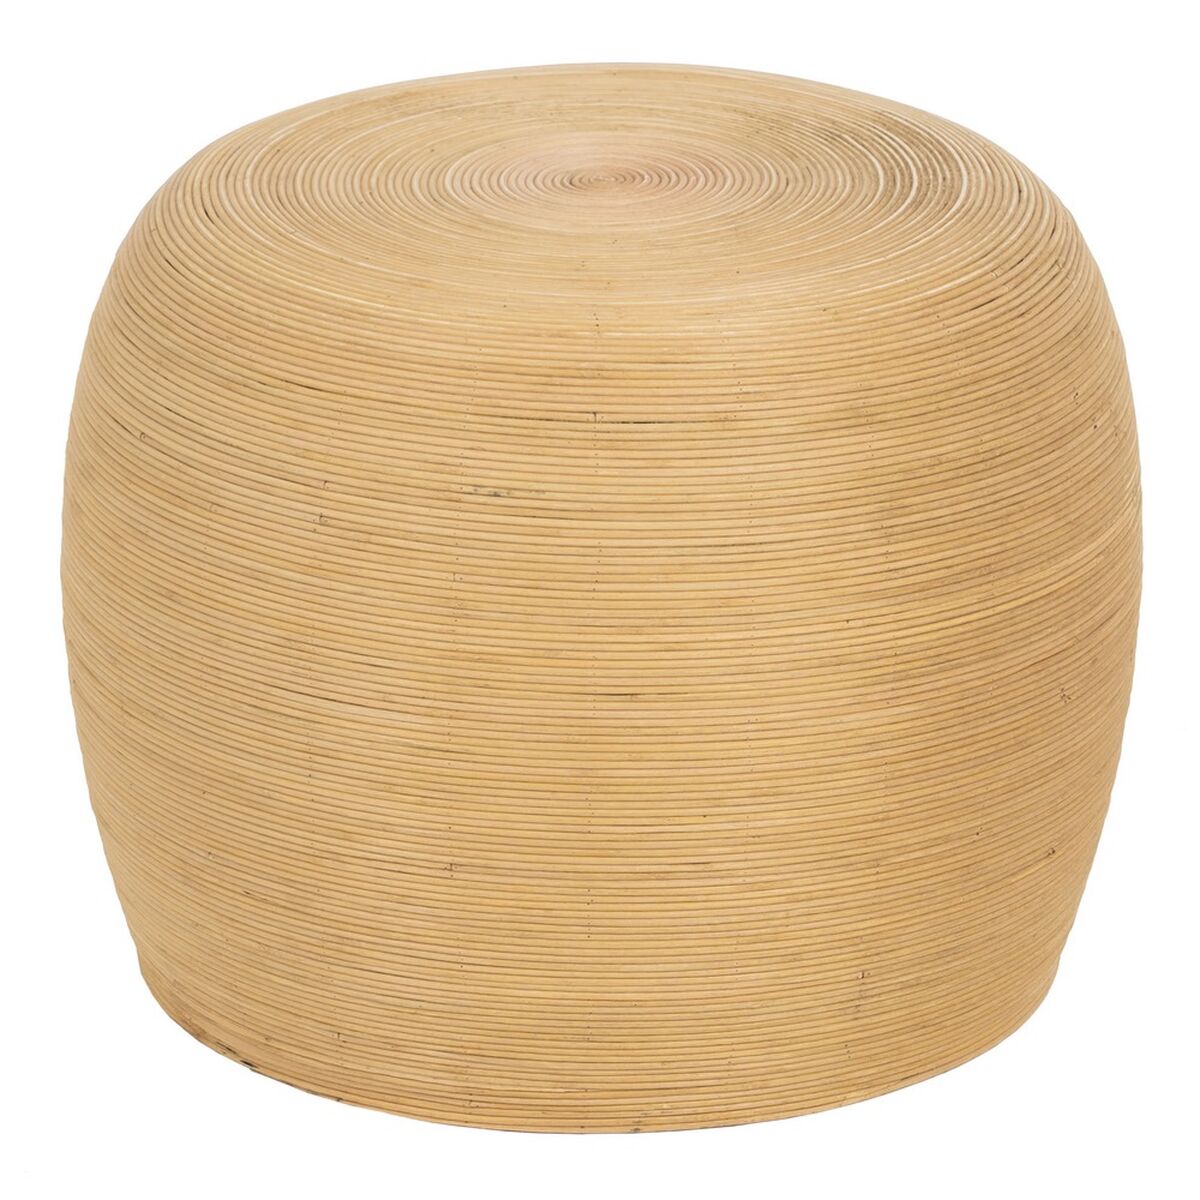 Table d'appoint Beige Bambou 49,5 x 49,5 x 37,5 cm